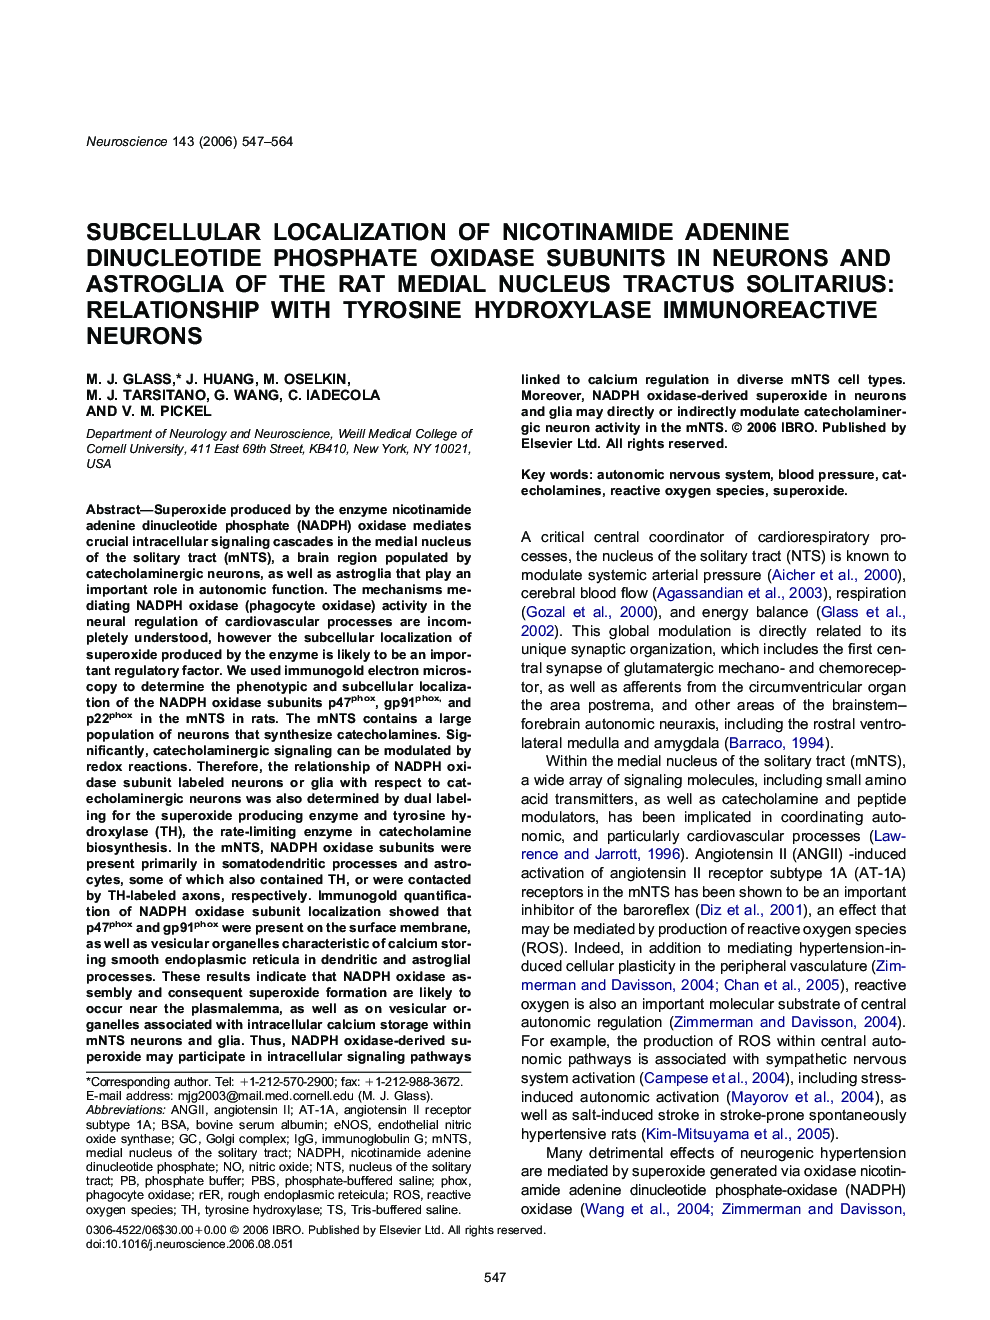 Subcellular localization of nicotinamide adenine dinucleotide phosphate oxidase subunits in neurons and astroglia of the rat medial nucleus tractus solitarius: Relationship with tyrosine hydroxylase immunoreactive neurons